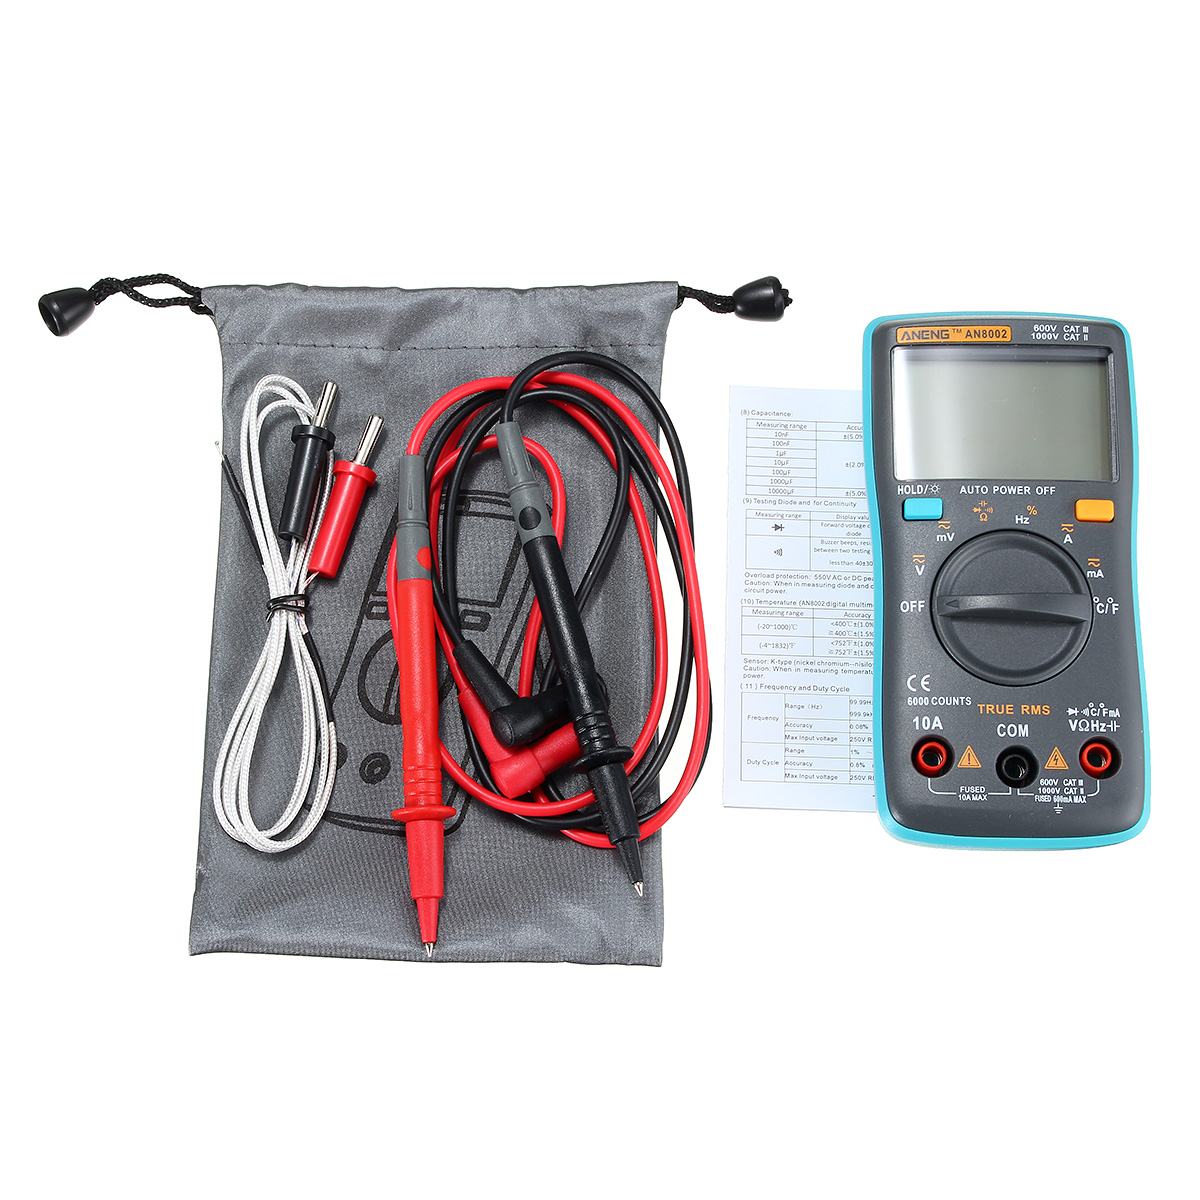 ANENG AN8002 Digital True RMS 6000 Counts Multimeter AC/DC Current Voltage Frequency Resistance Temperature Tester ℃/℉ 159